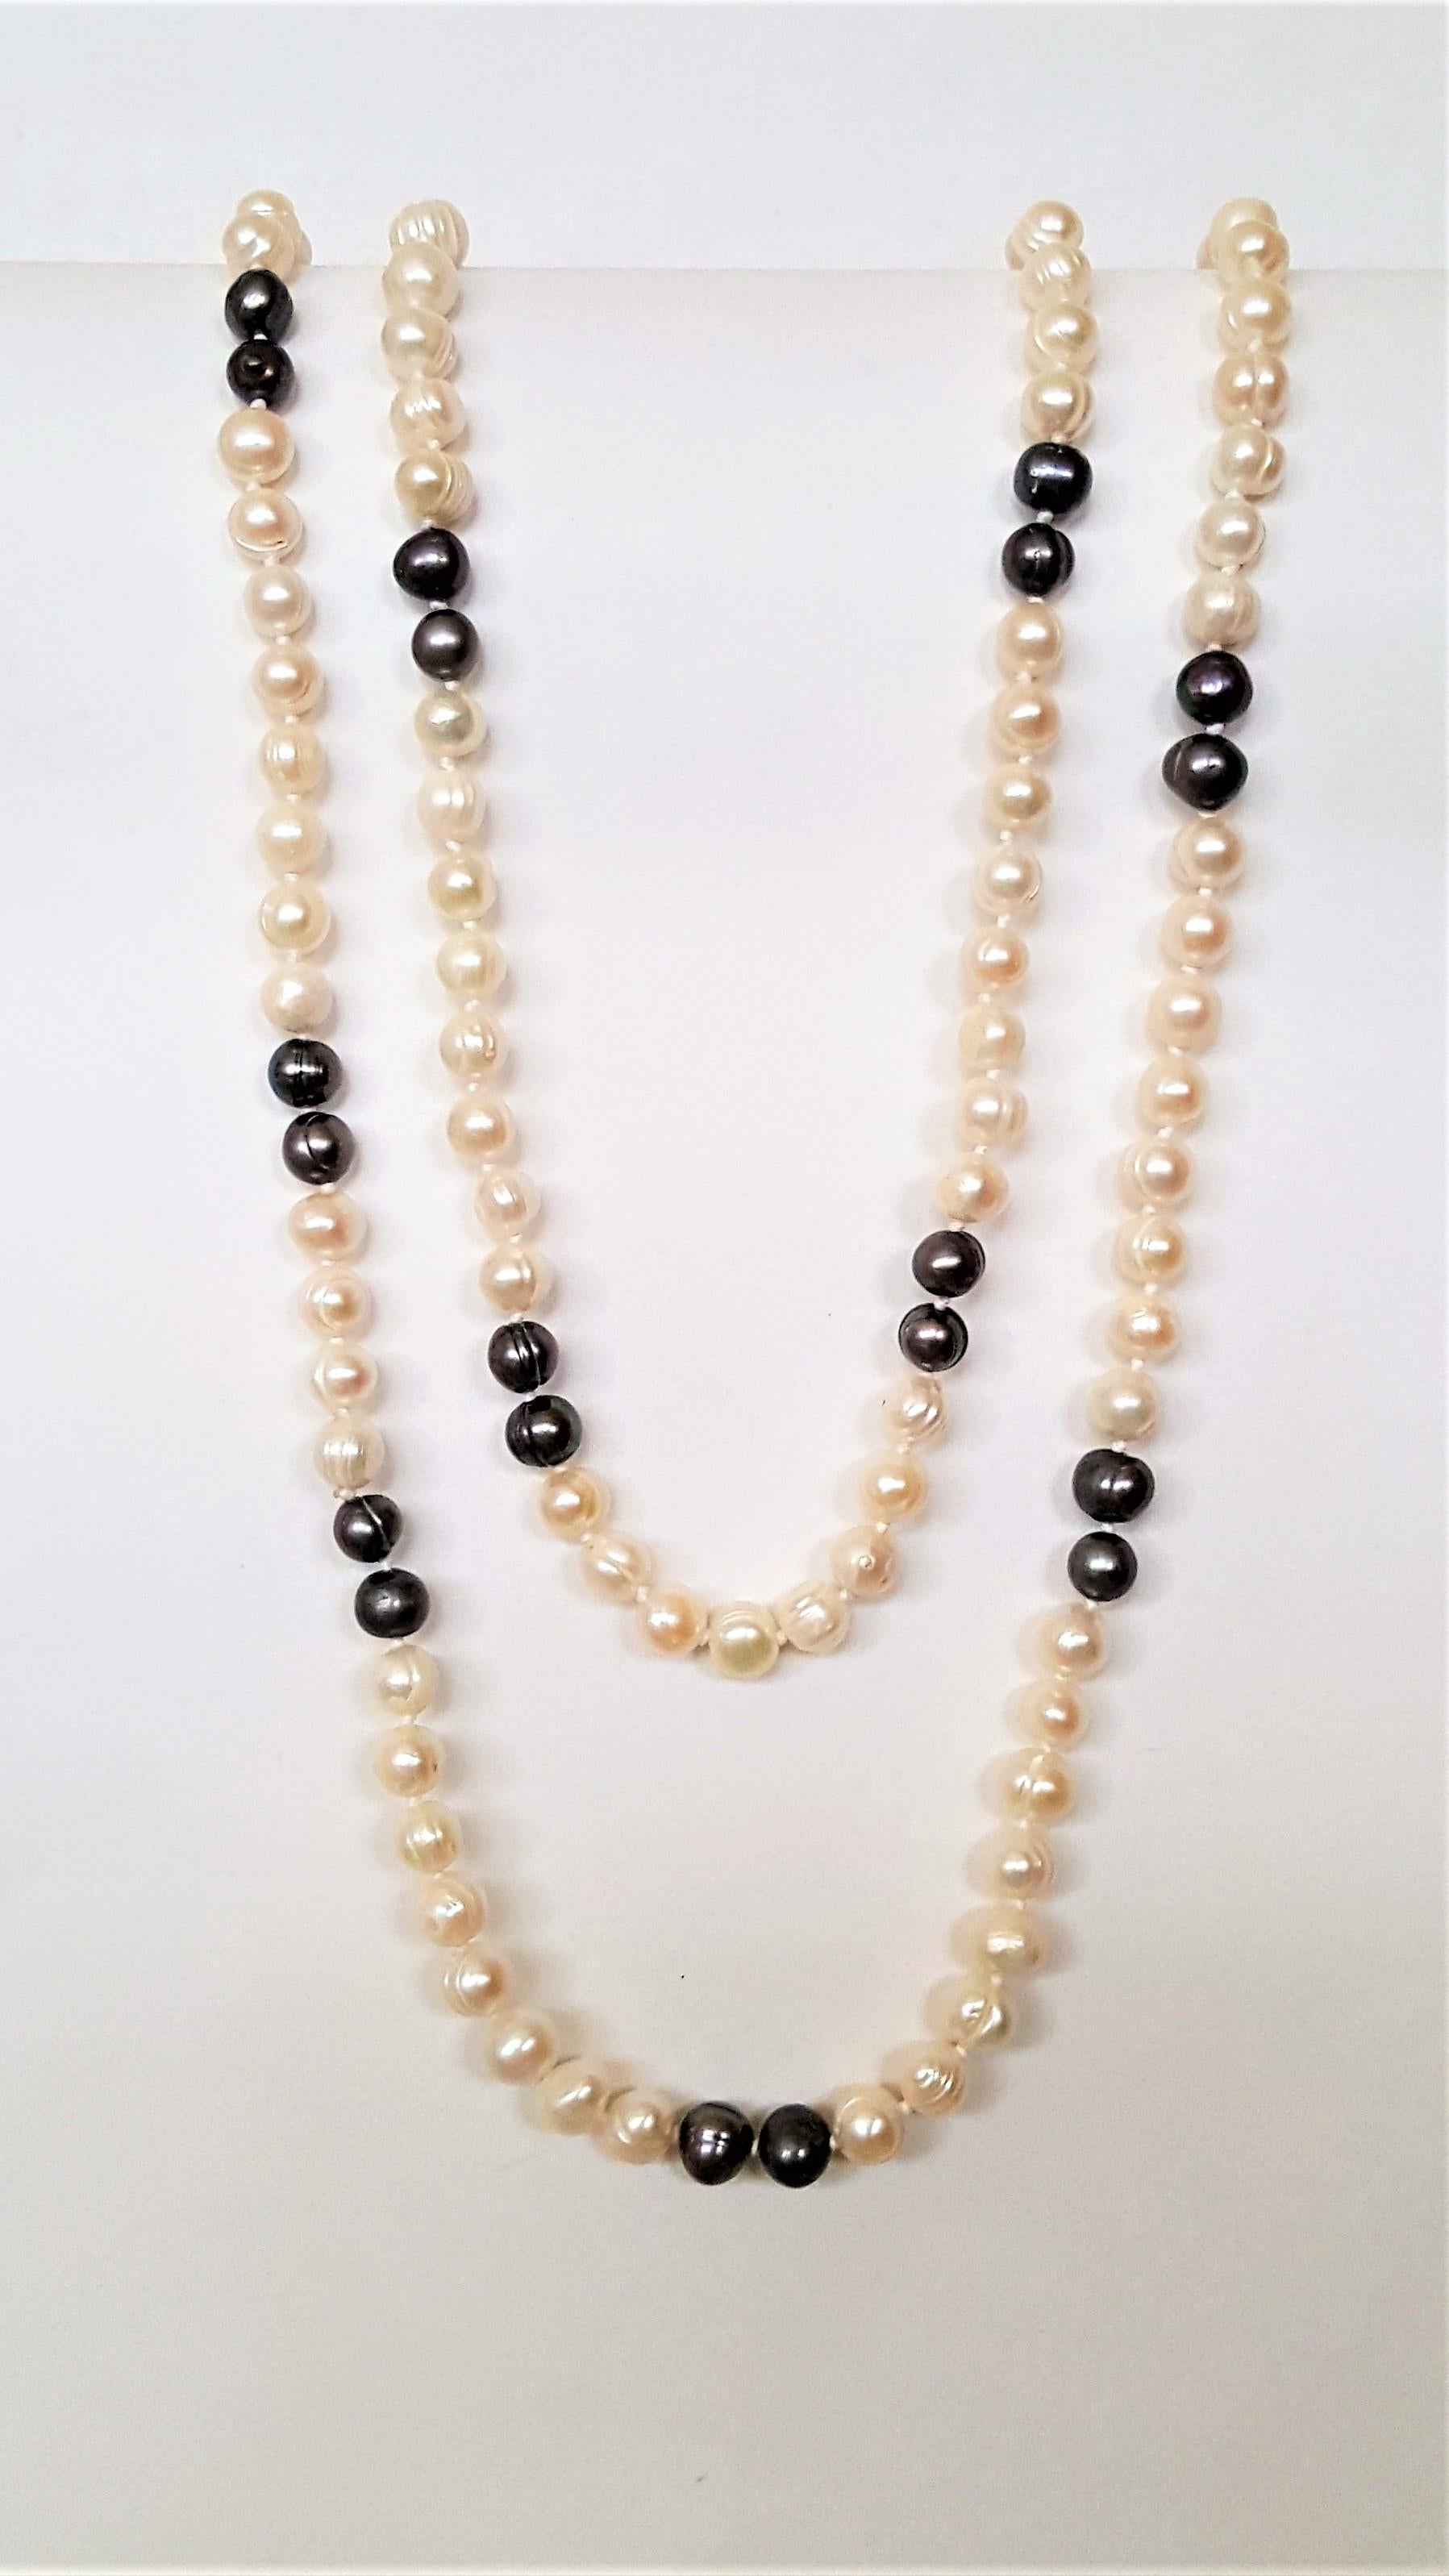 A beautiful strand of freshwater pearls that's 62 inches in length with white and silver/blue pearls that have a very good luster and nacre. The pearls are 7-8mm in diameter.

These pearls make a beautiful double strand and classic and timeless